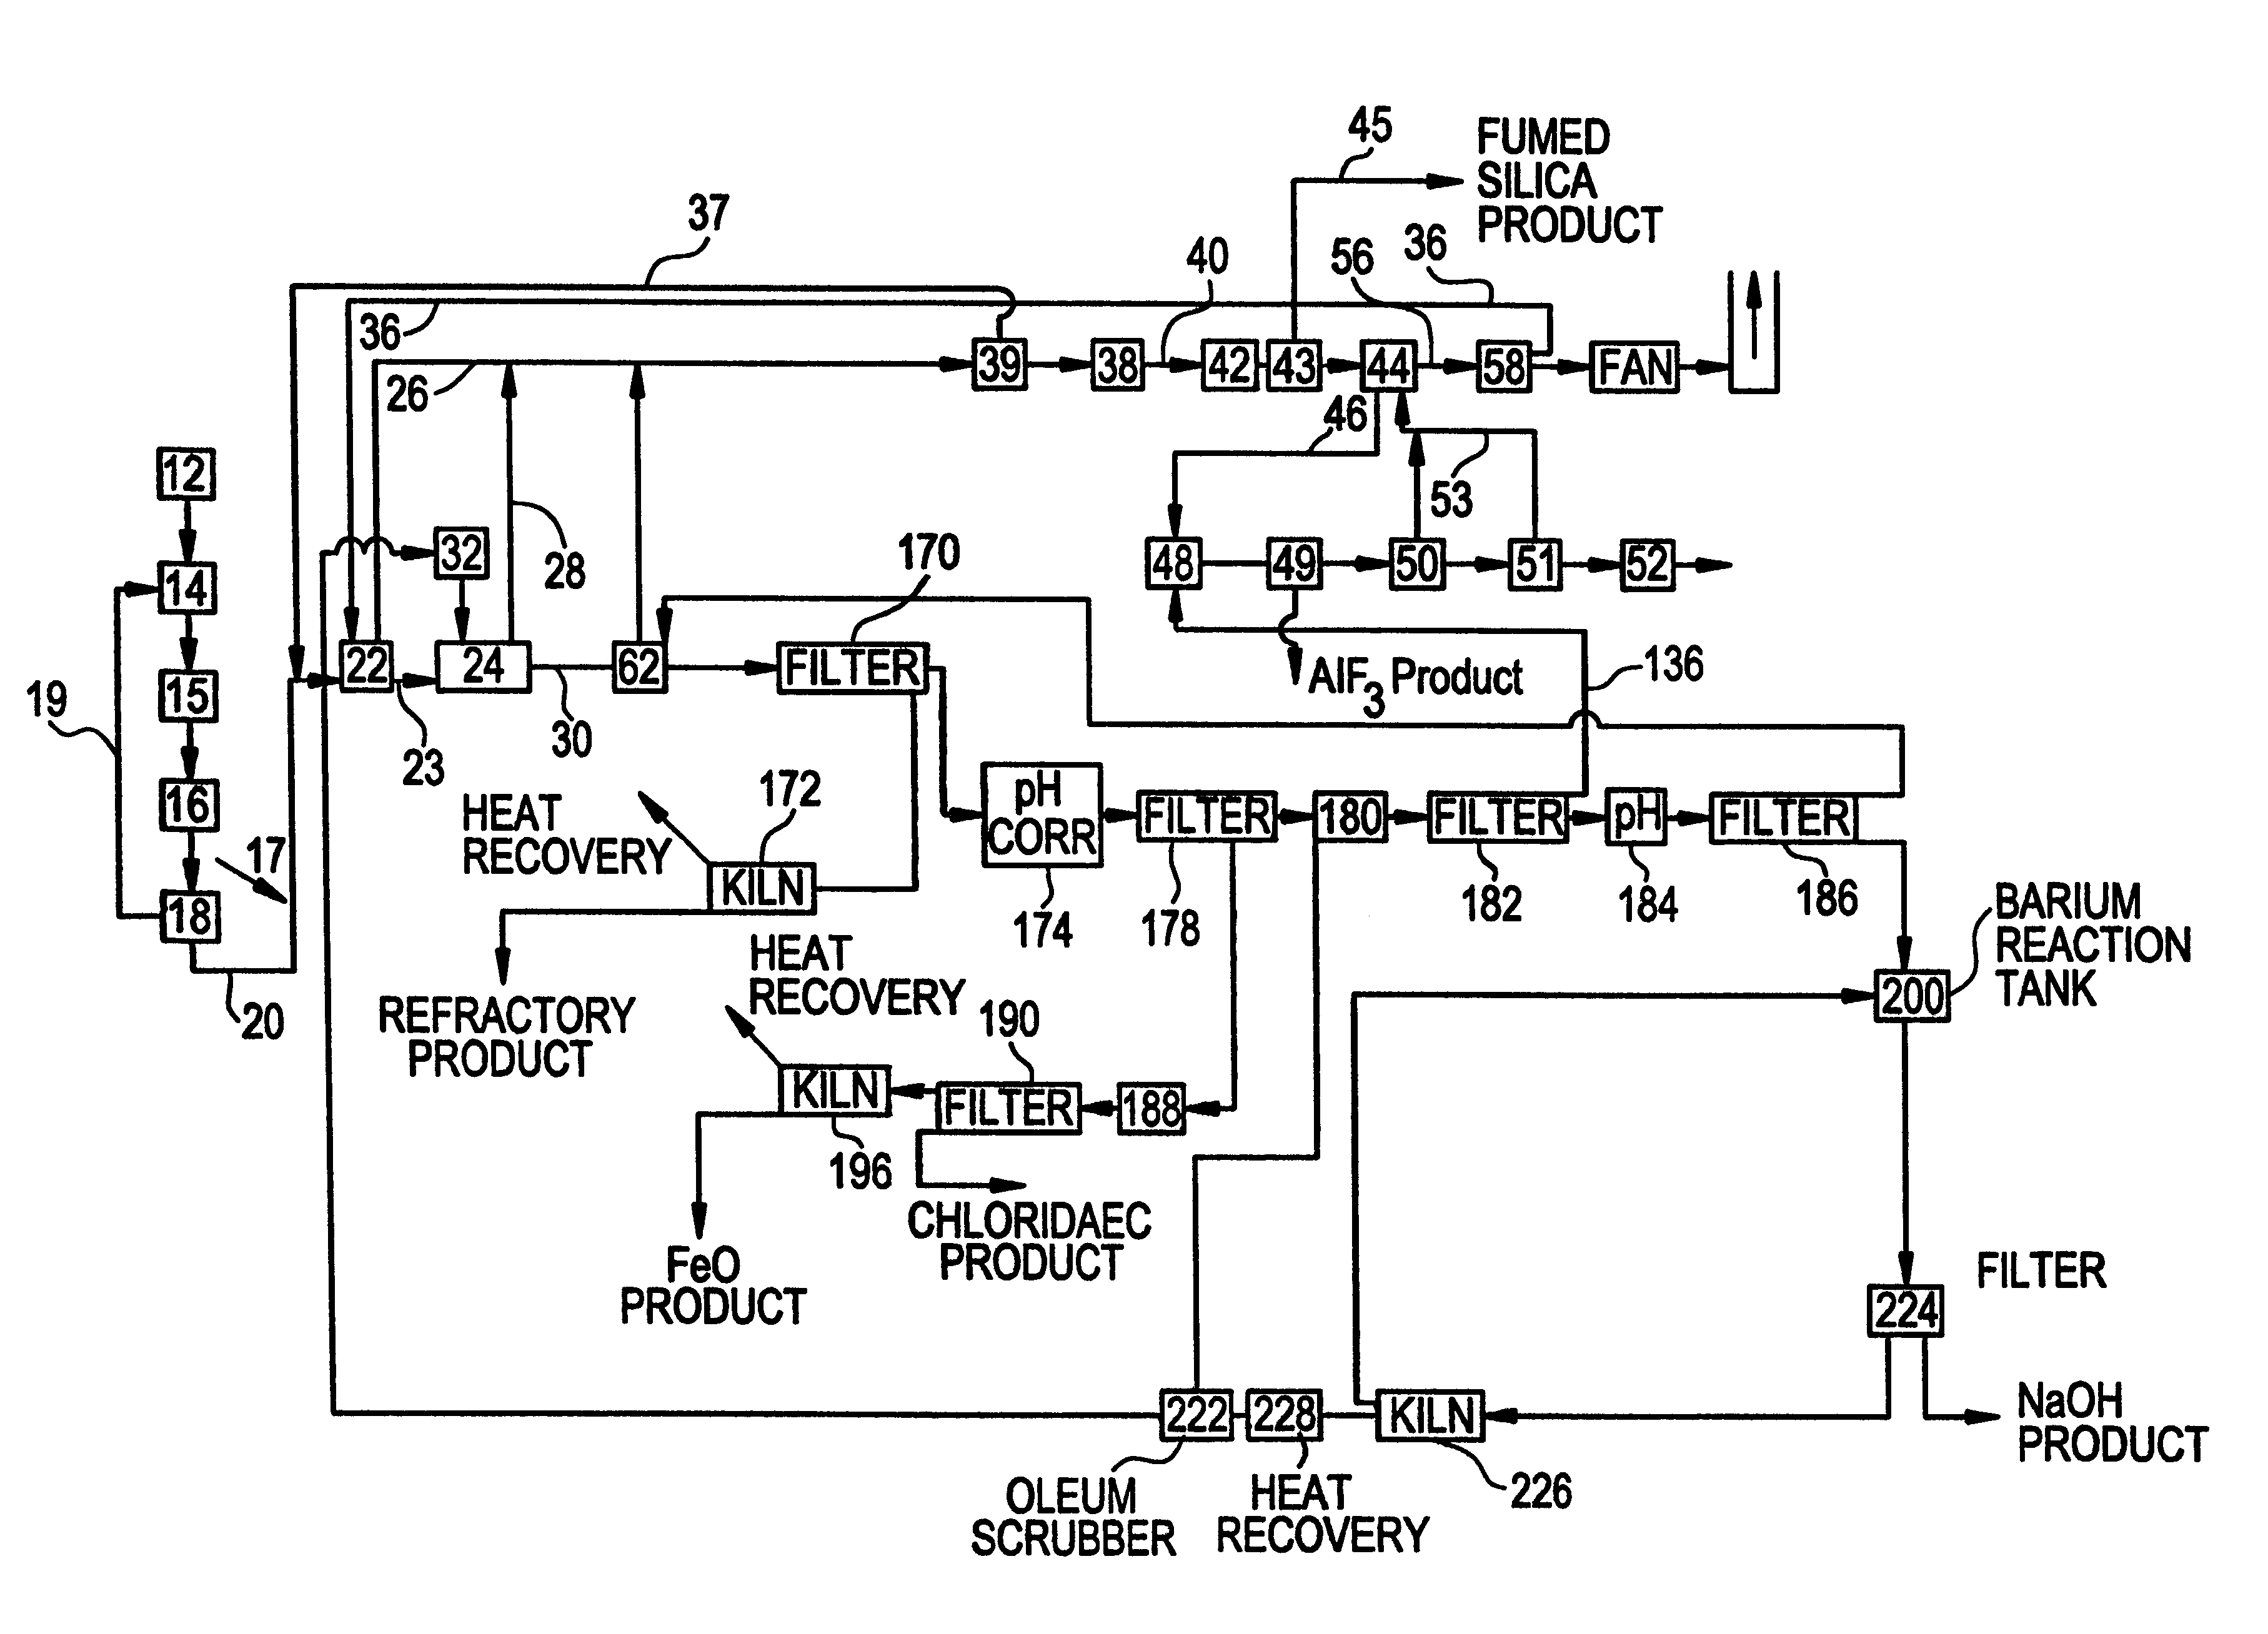 Method of recovering fumed silica from spent potliner